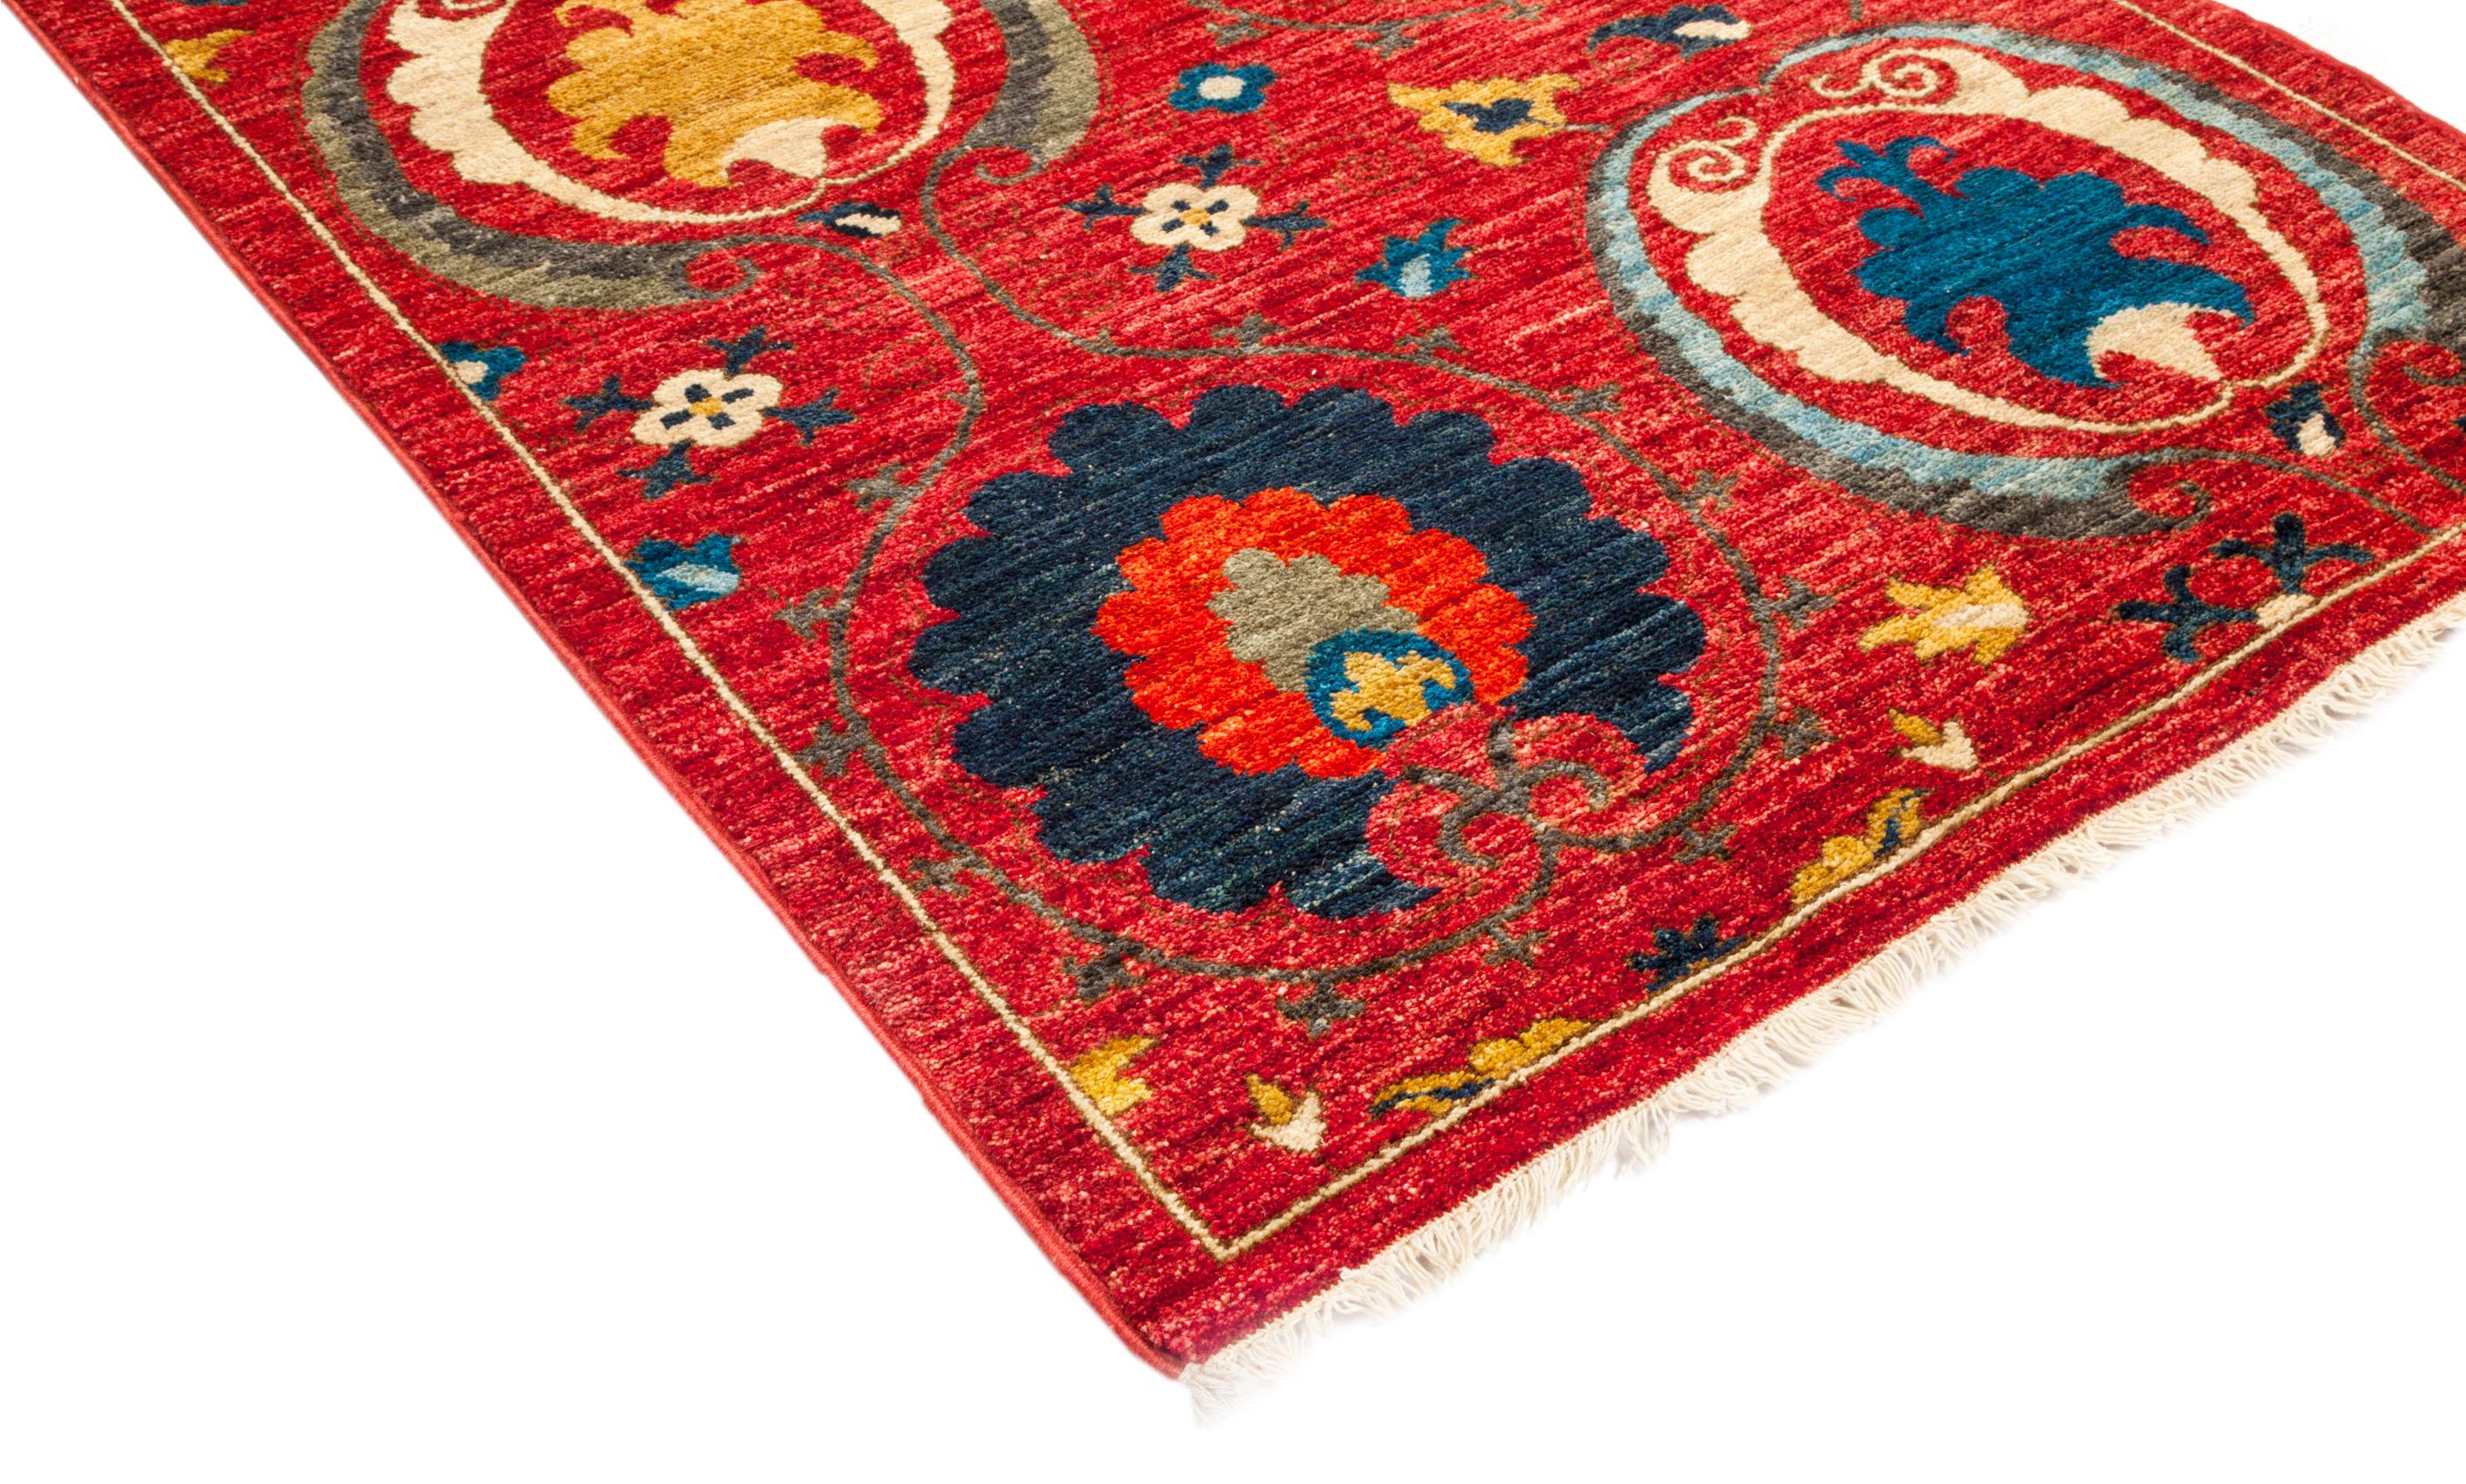 Color: Red, made in Pakistan. 100% wool. Whether boasting a field of flowers or ancient tribal symbols, patterned rugs are the easiest way to enrich a space. Subtle colors and intricate motifs reinforce the quiet sophistication of a traditional